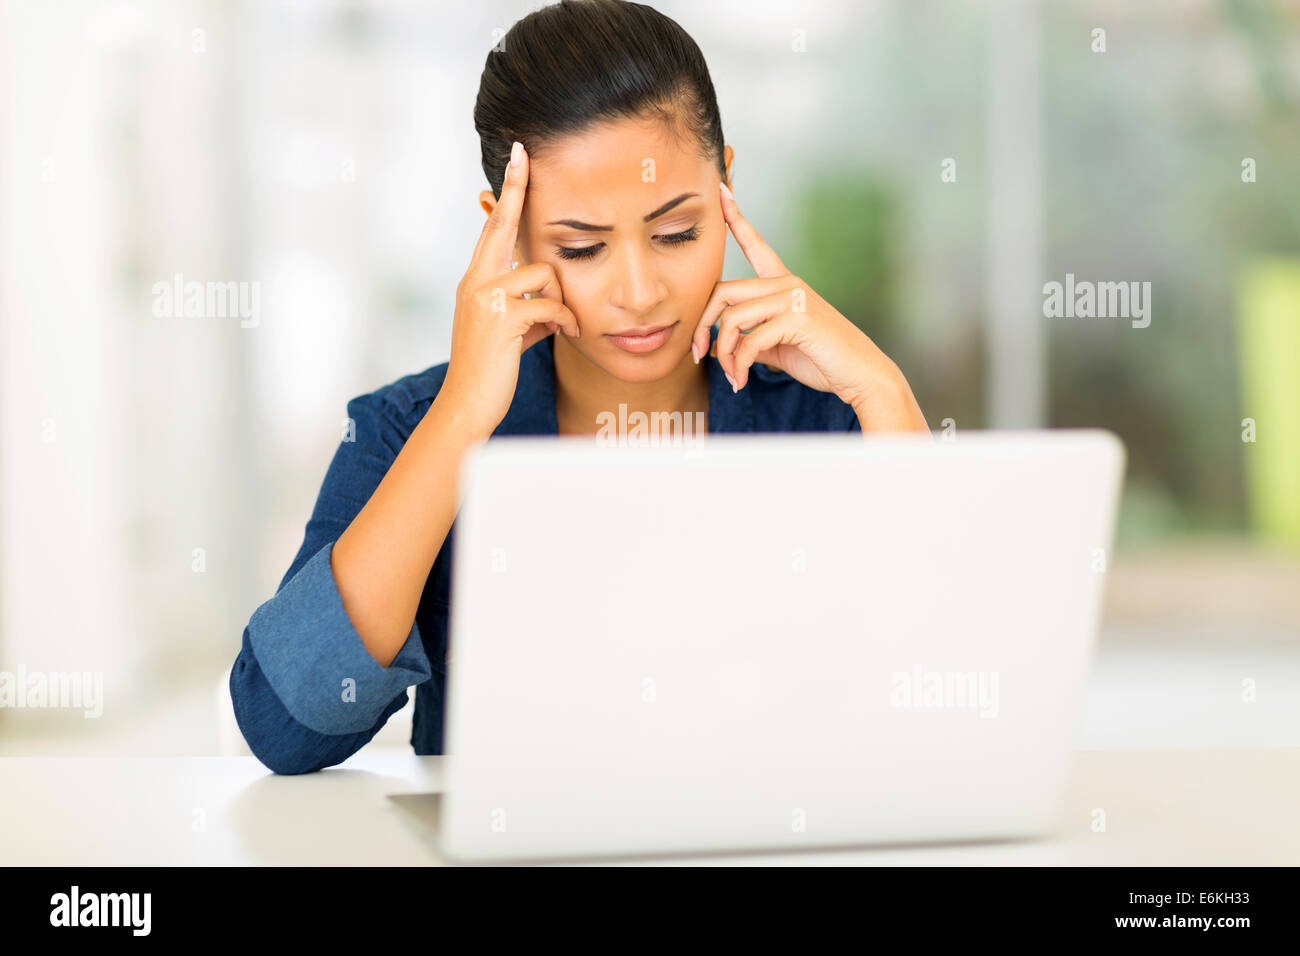 unhappy young woman looking at computer screen Stock Photo